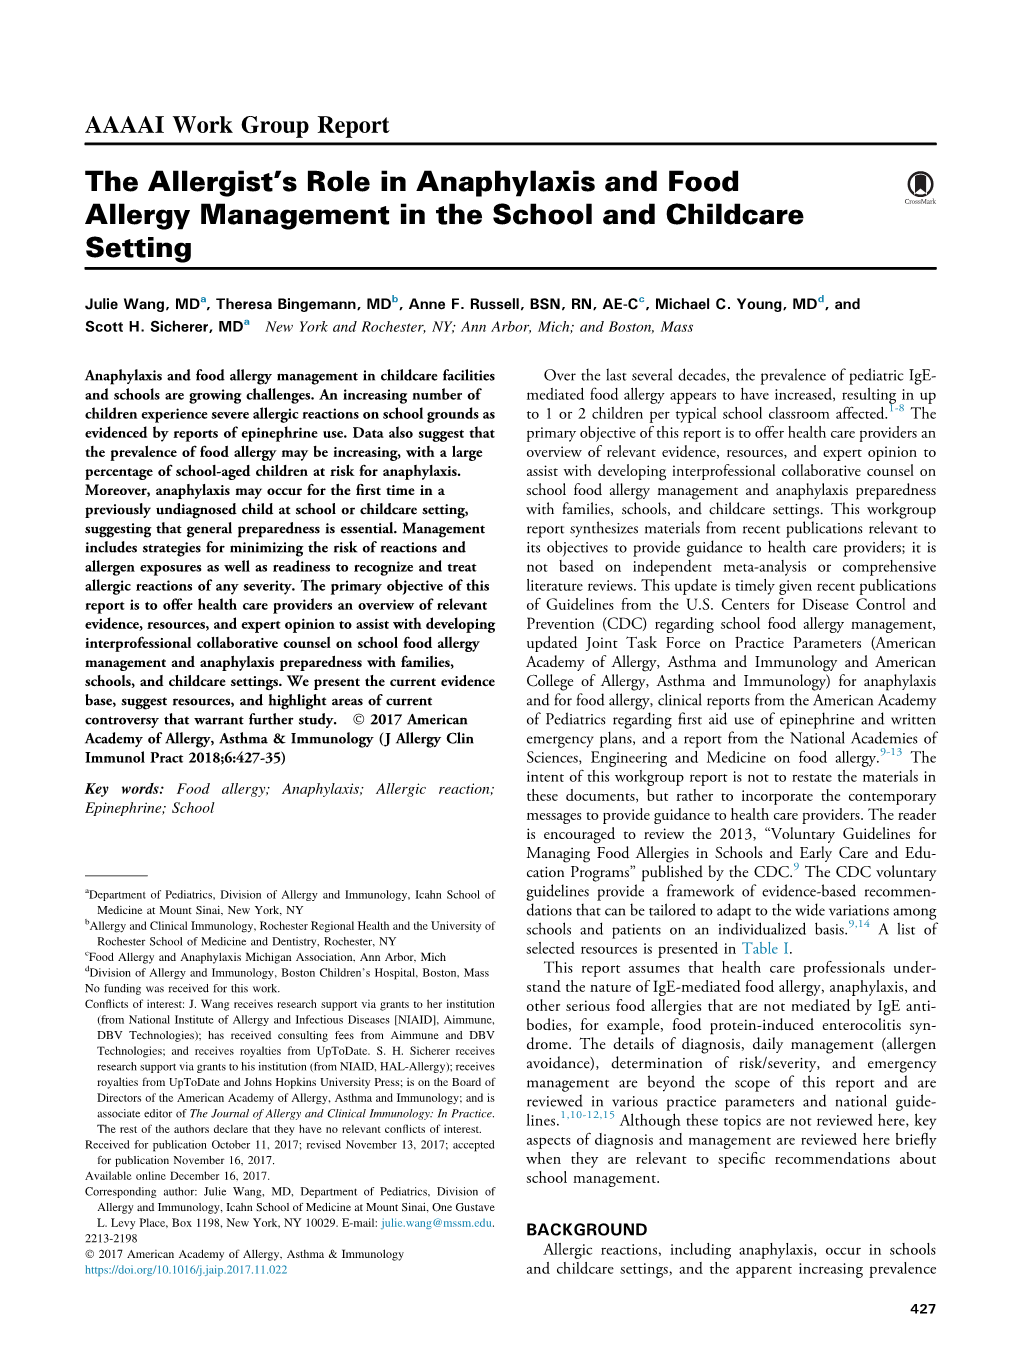 The Allergist's Role in Anaphylaxis and Food Allergy Management In